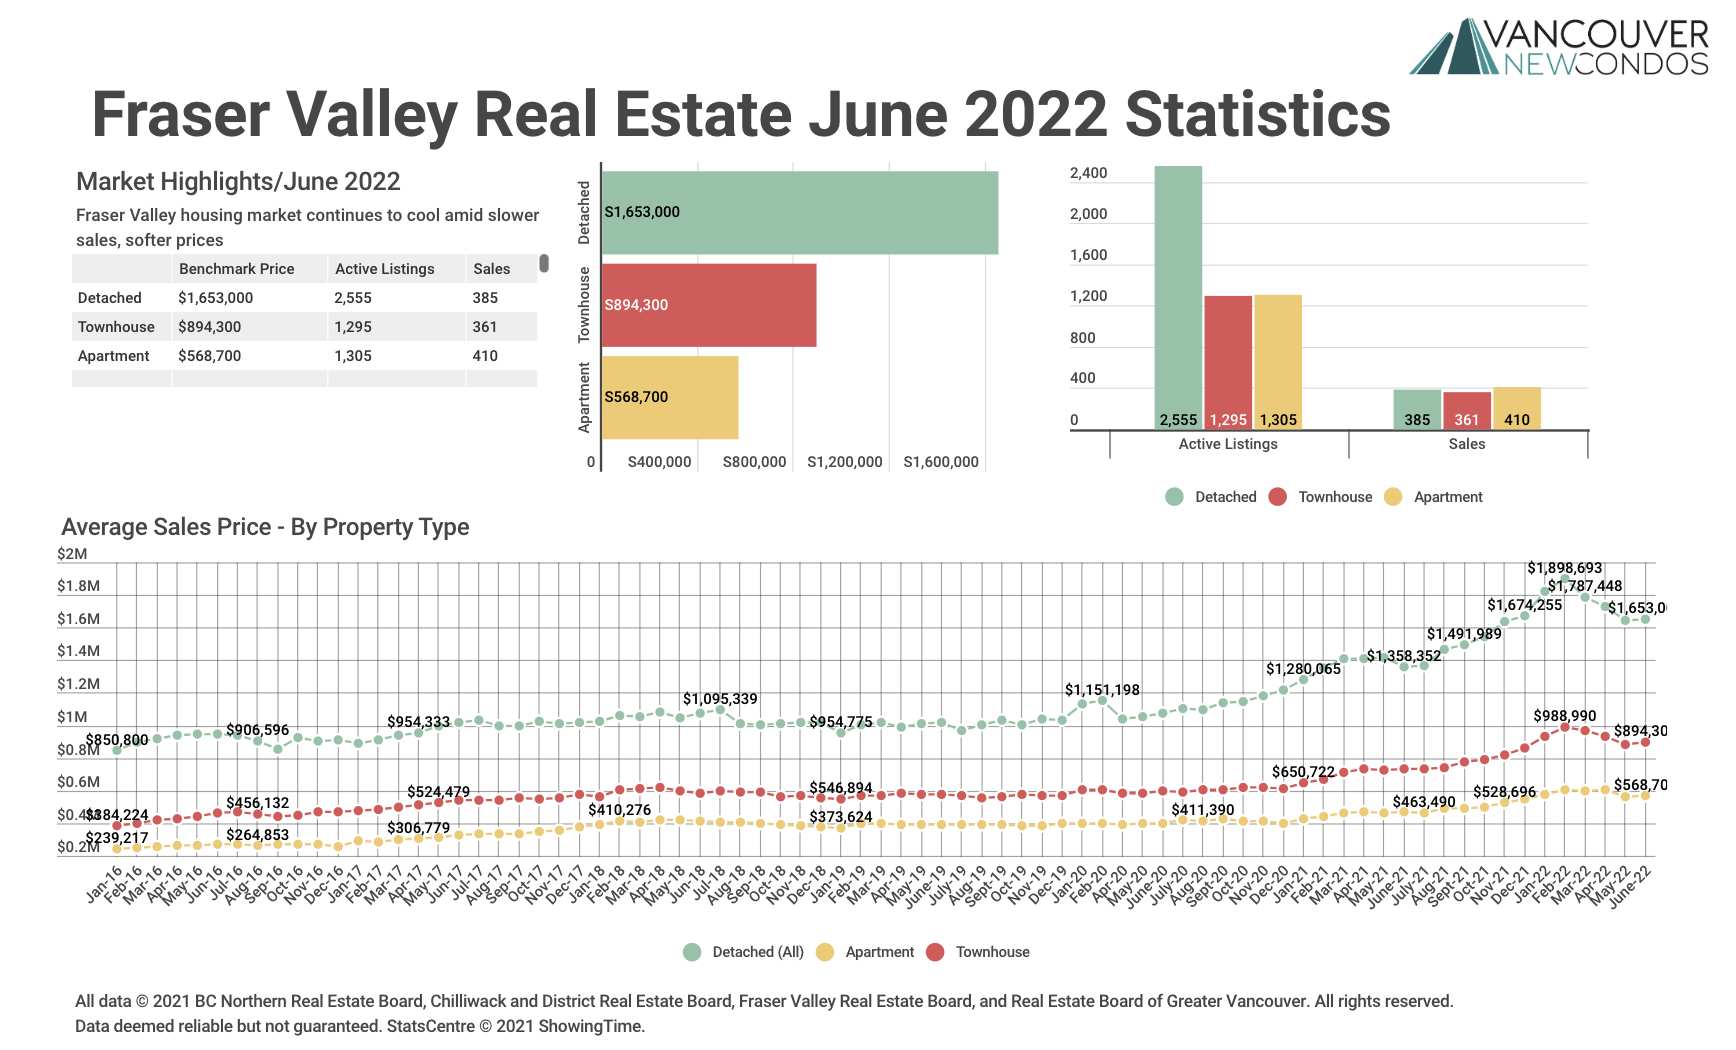 FVREB June 2022 stats graph